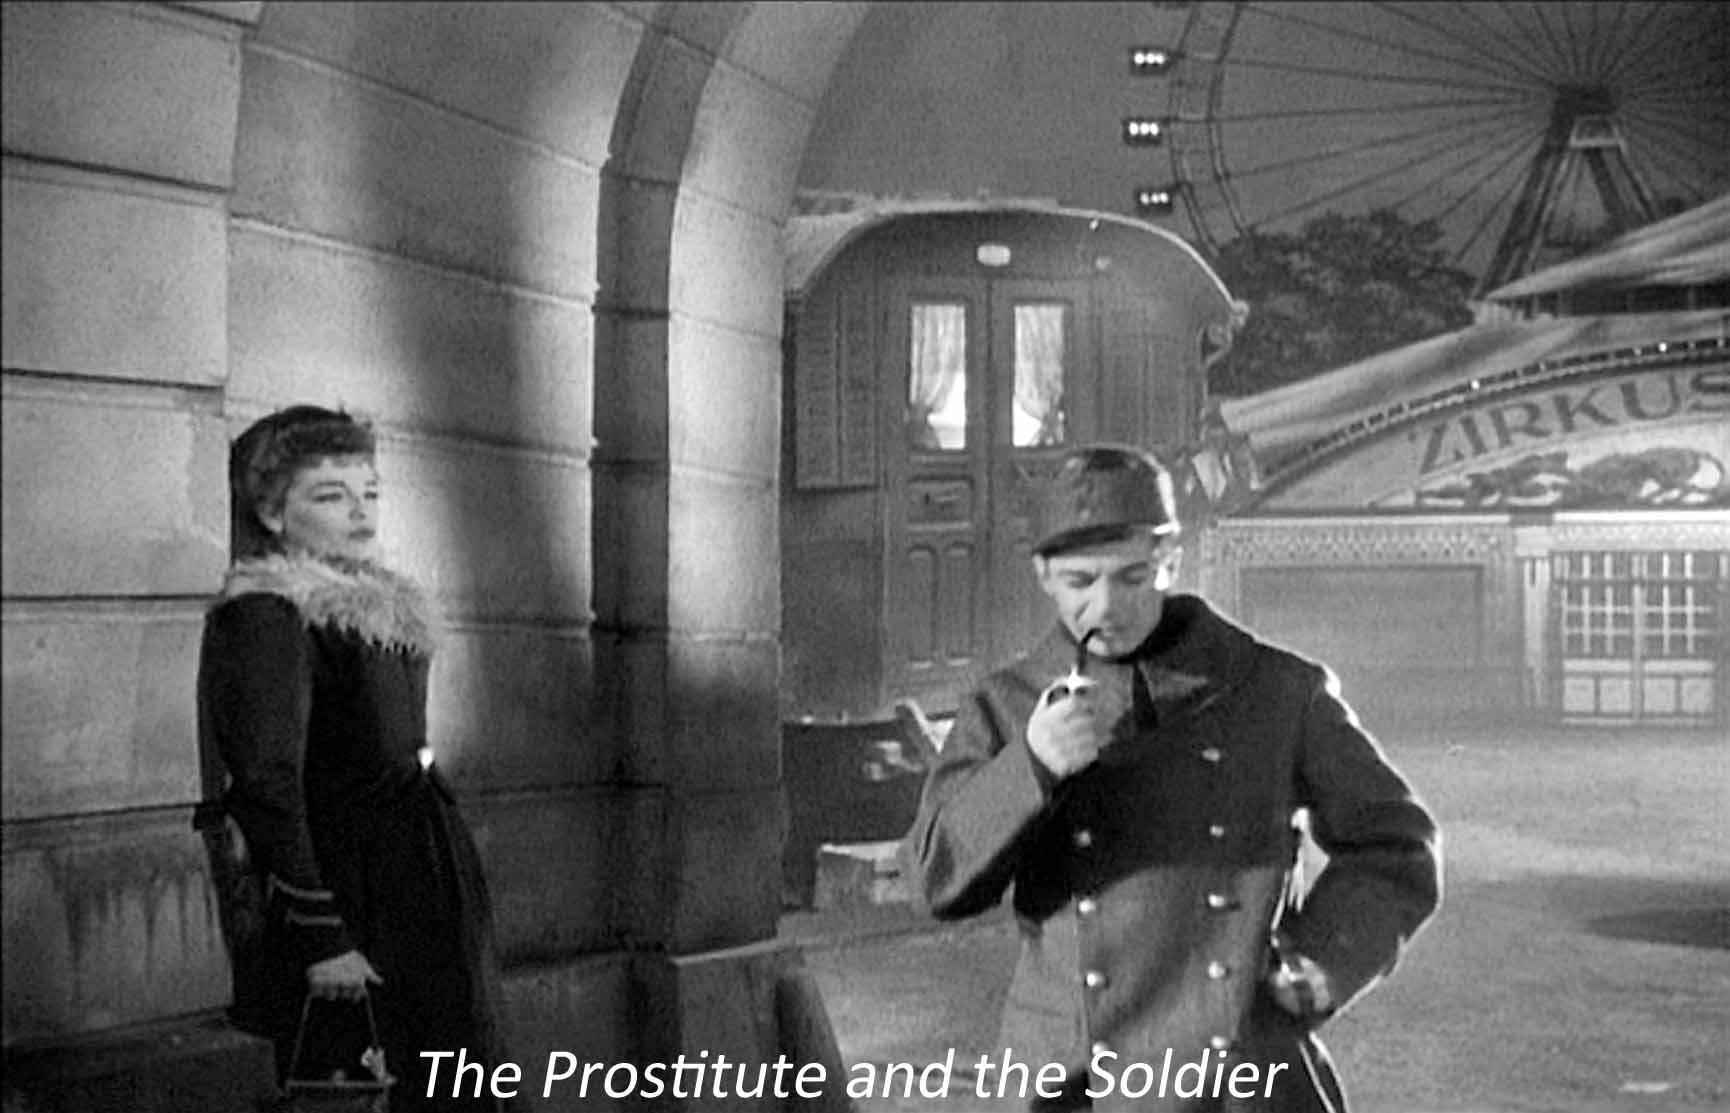 The Prostitute and the Soldier